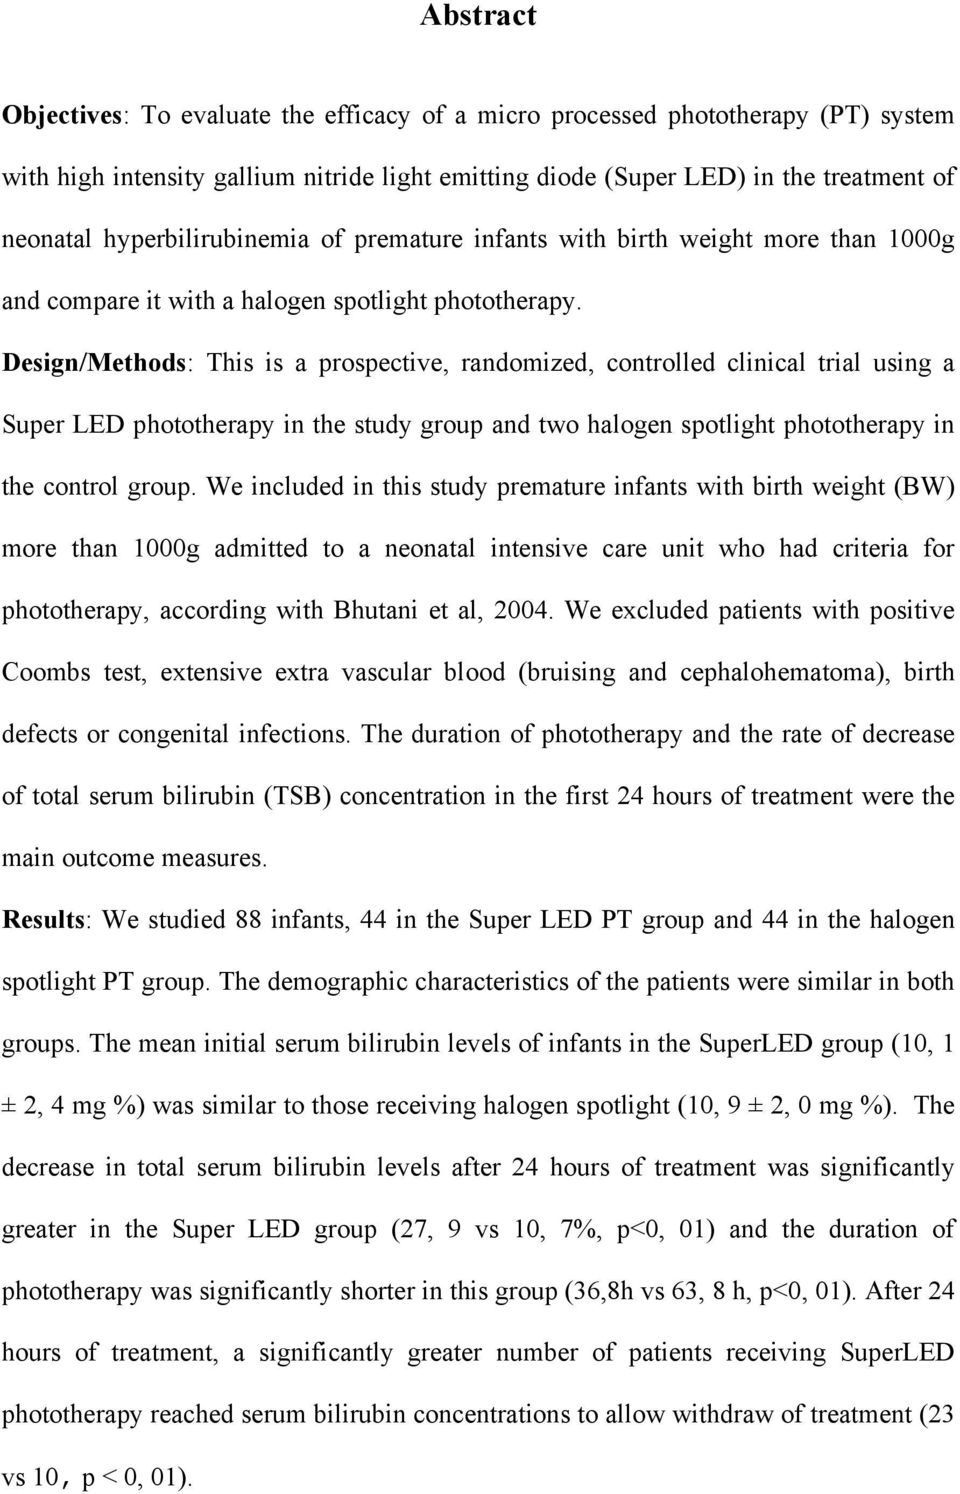 Design/Methods: This is a prospective, randomized, controlled clinical trial using a Super LED phototherapy in the study group and two halogen spotlight phototherapy in the control group.